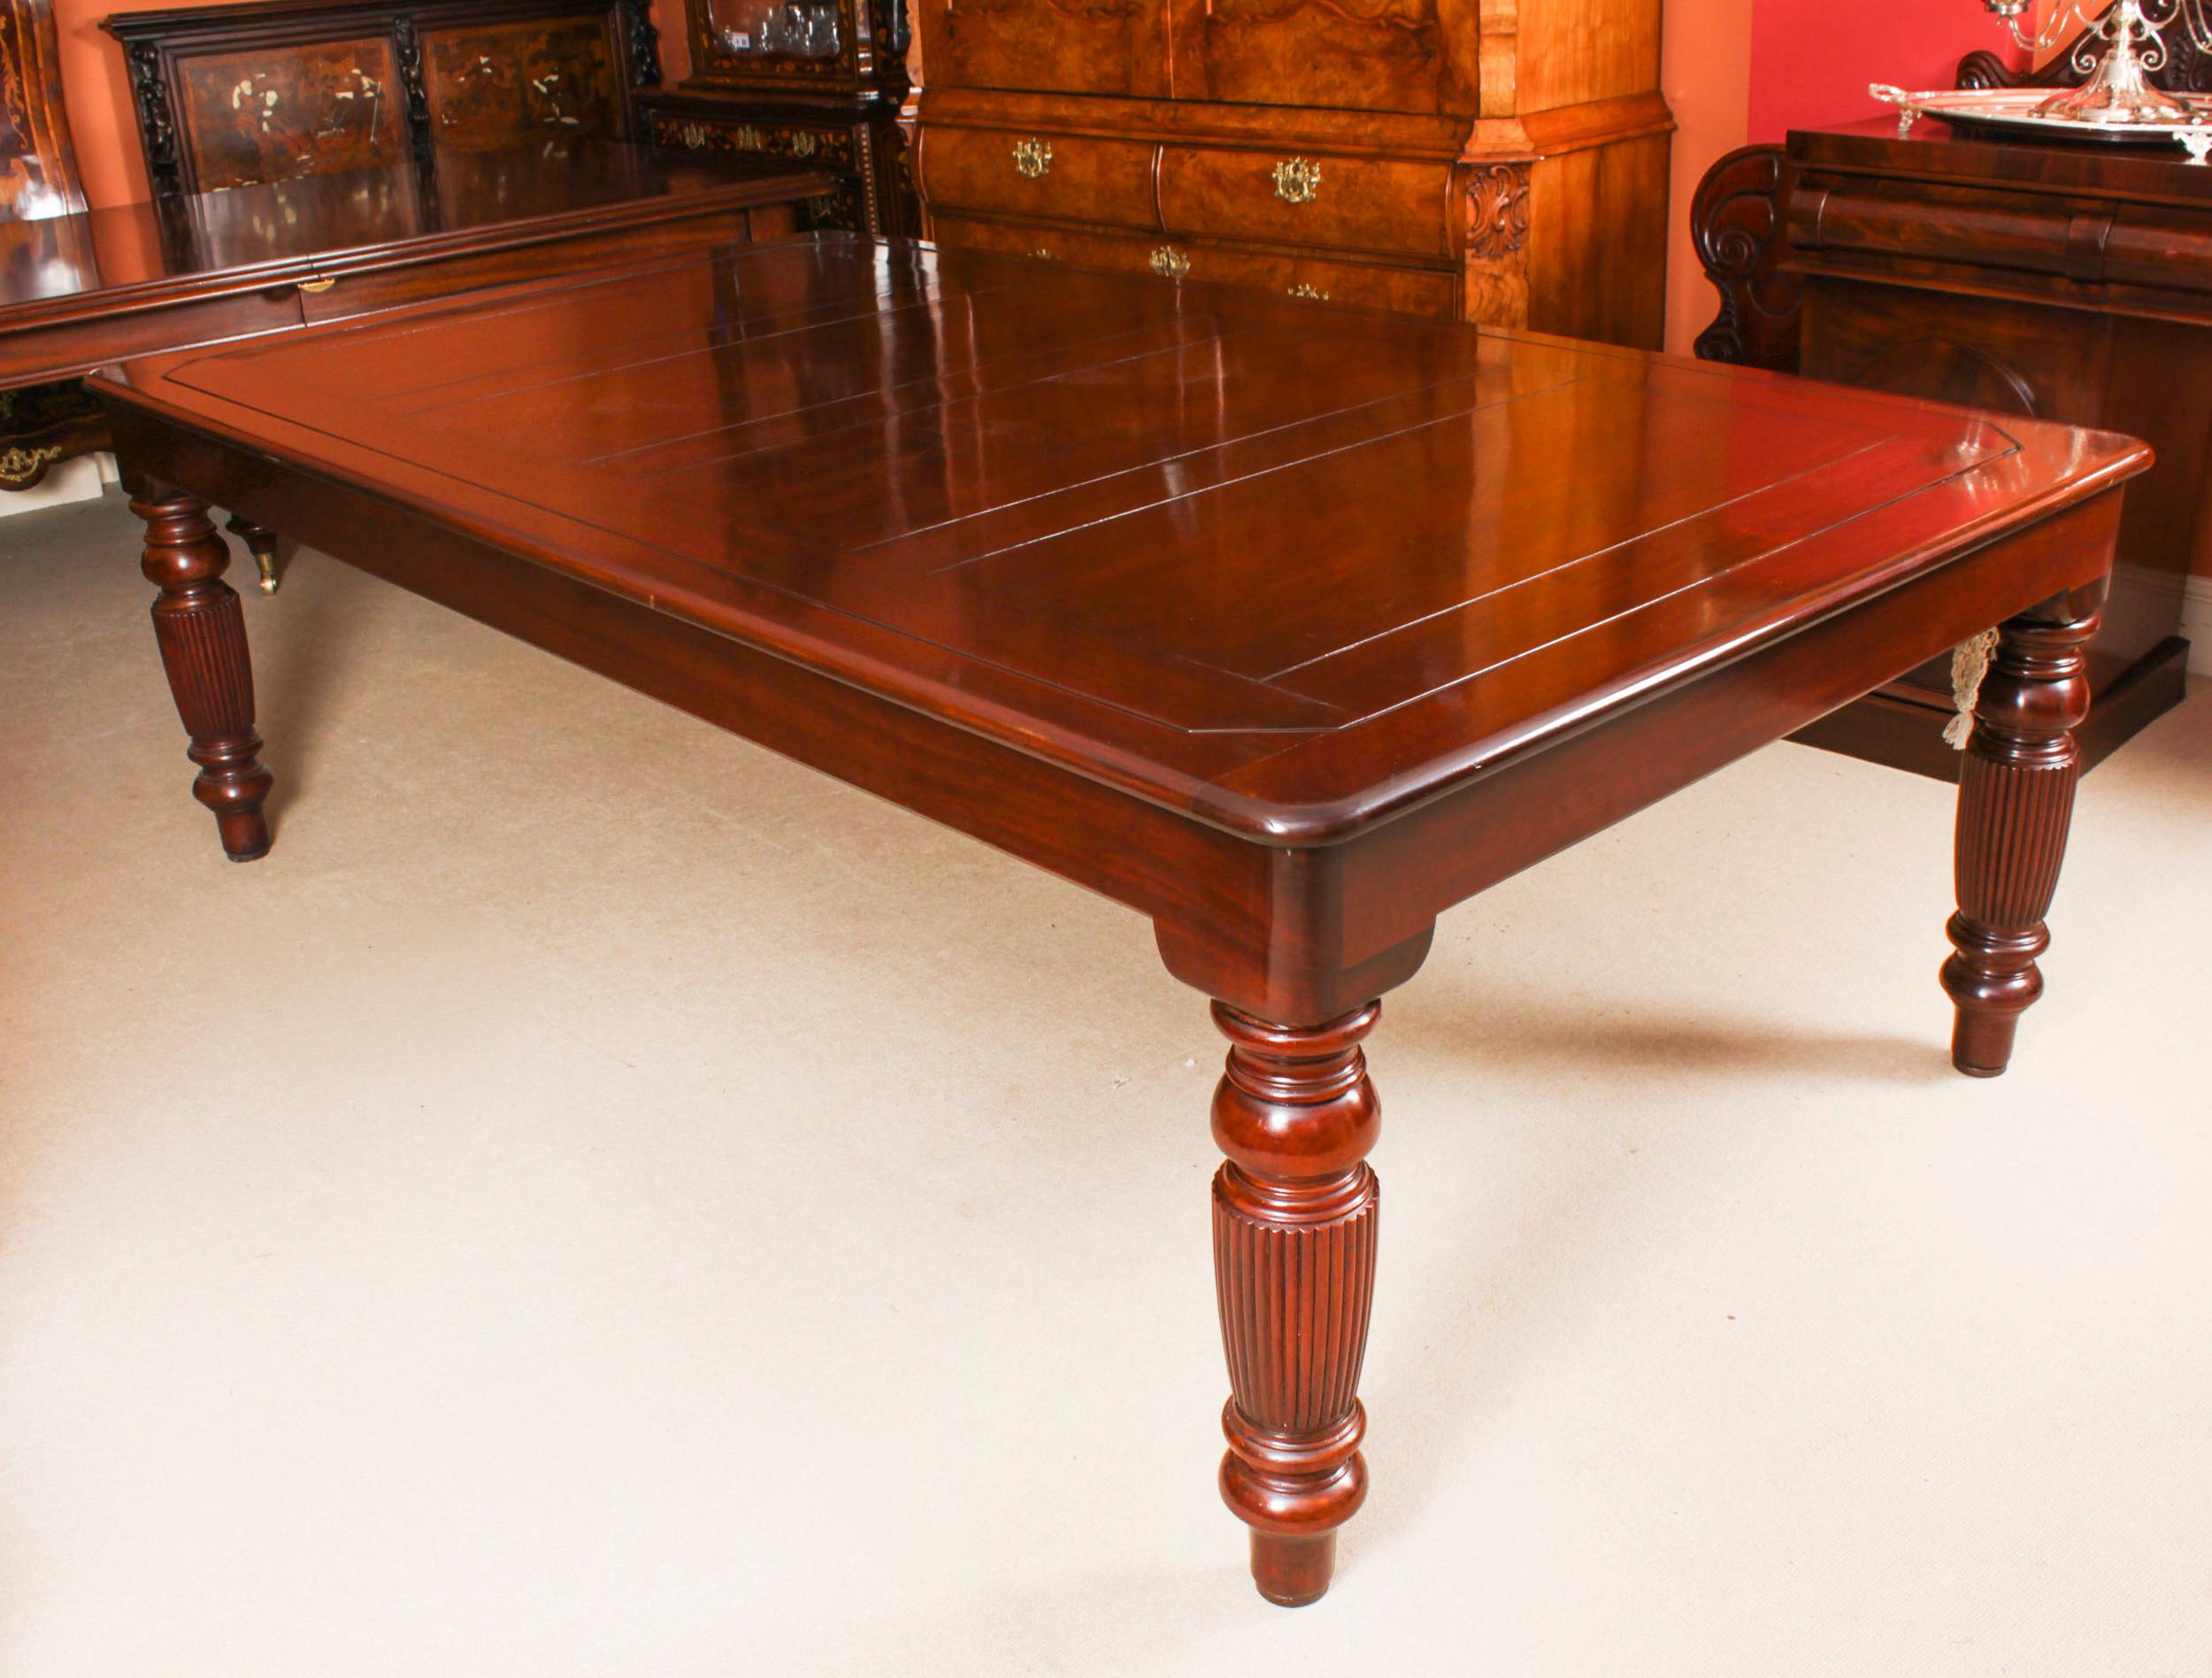 A superb antique Victorian revolving mahogany billiards table/dining table, in the manner of Riley, dating from Circa 1880.

The oblong top rotating on a central axis to reveal a raised baized lined slate bed table with netted pockets raised on four